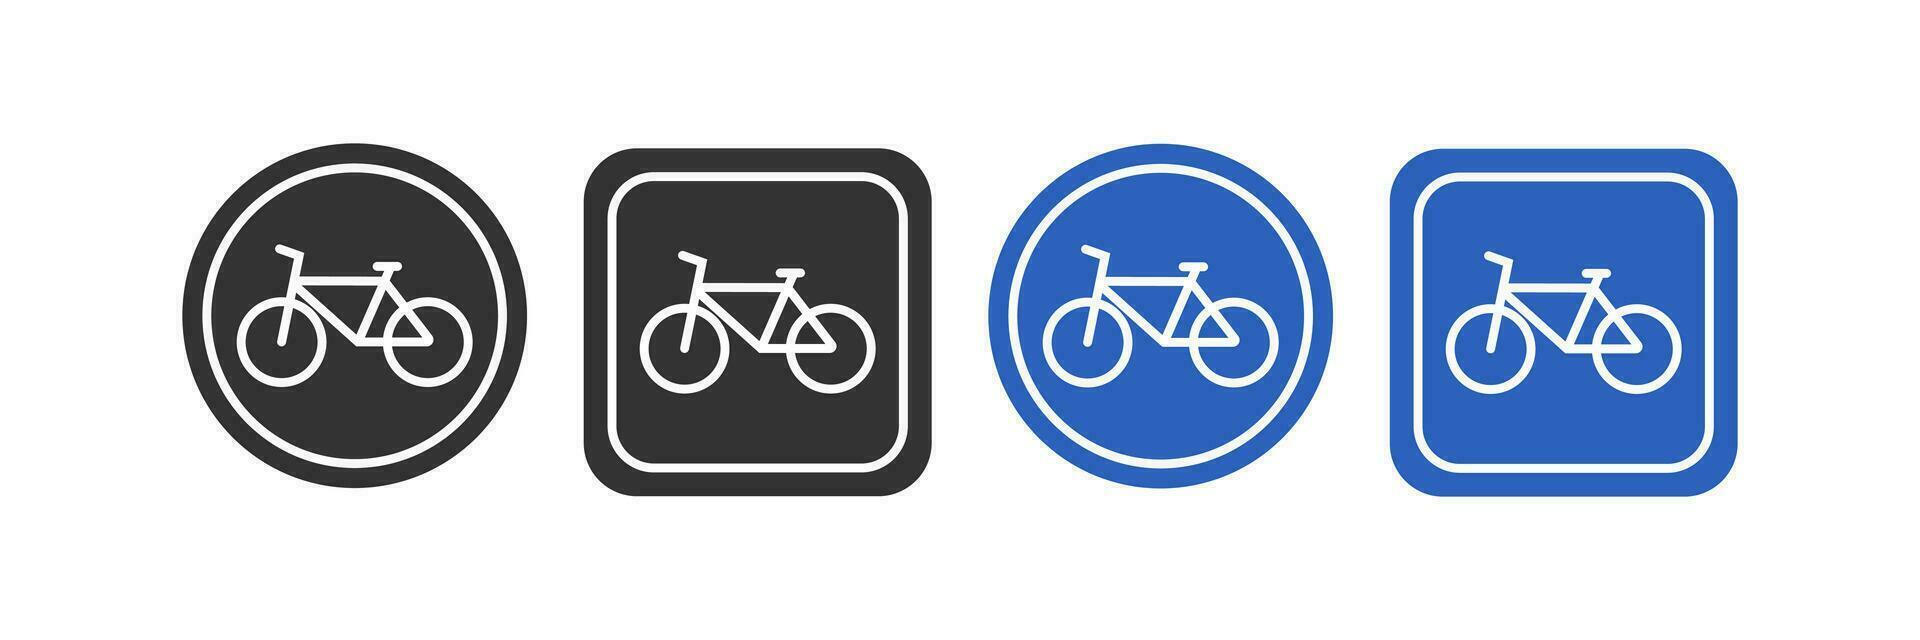 Bike path sign icon. Bicycle symbol. Transport vector. vector